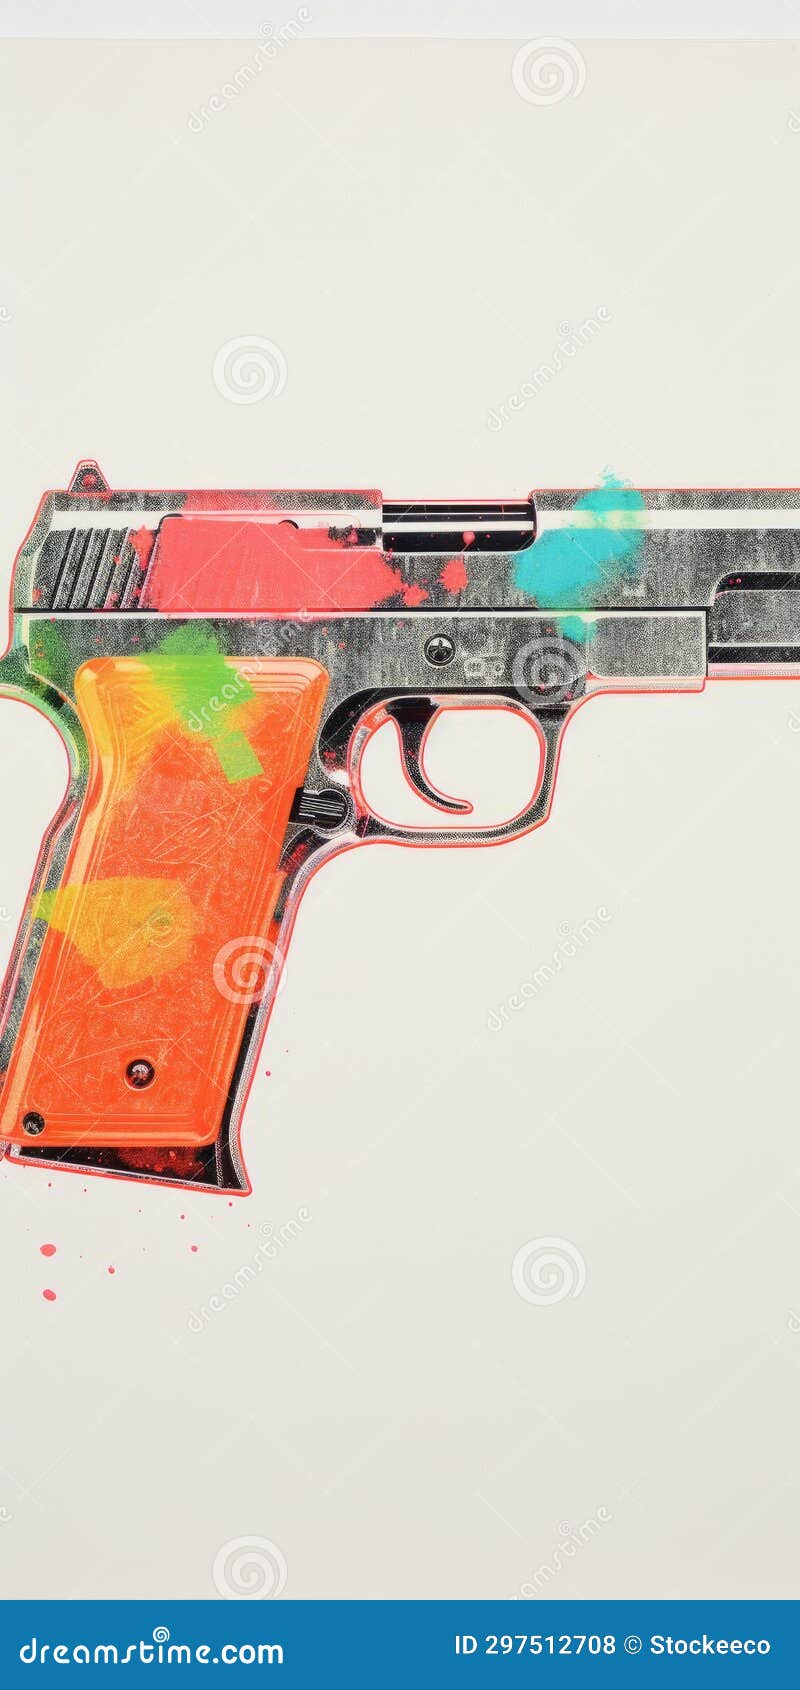 colorful gun art: a fusion of etching, pop art, and photorealism